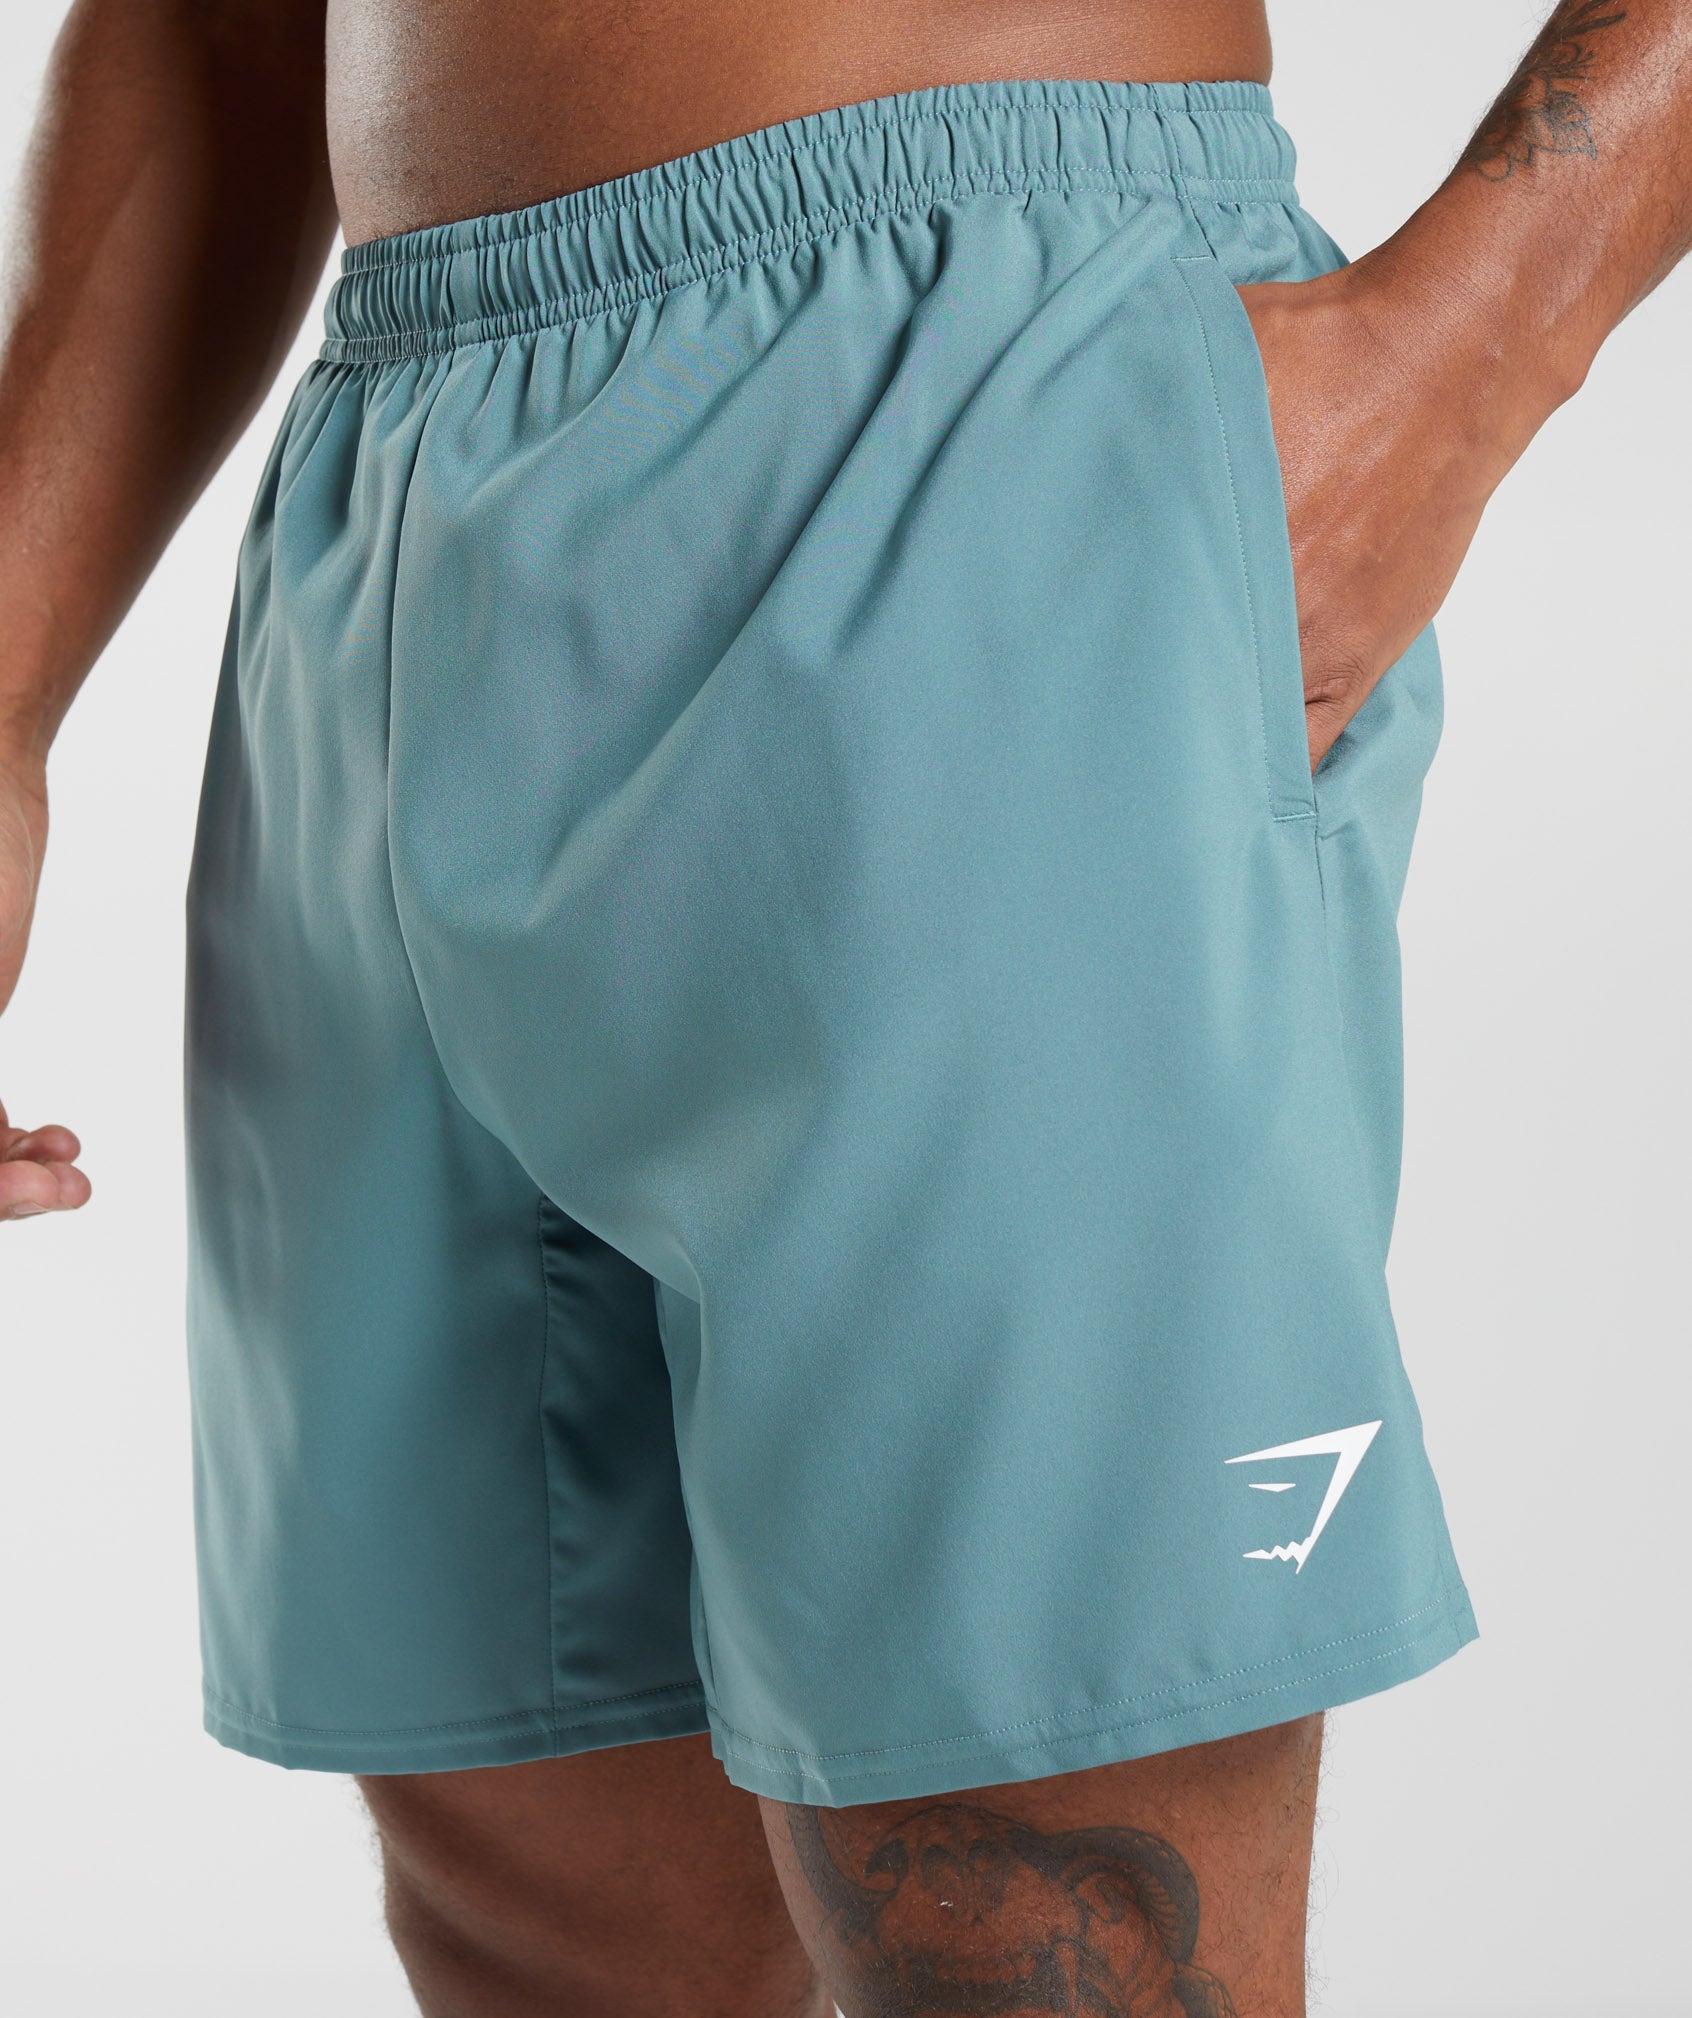 Arrival 7" Shorts in Thunder Blue - view 3